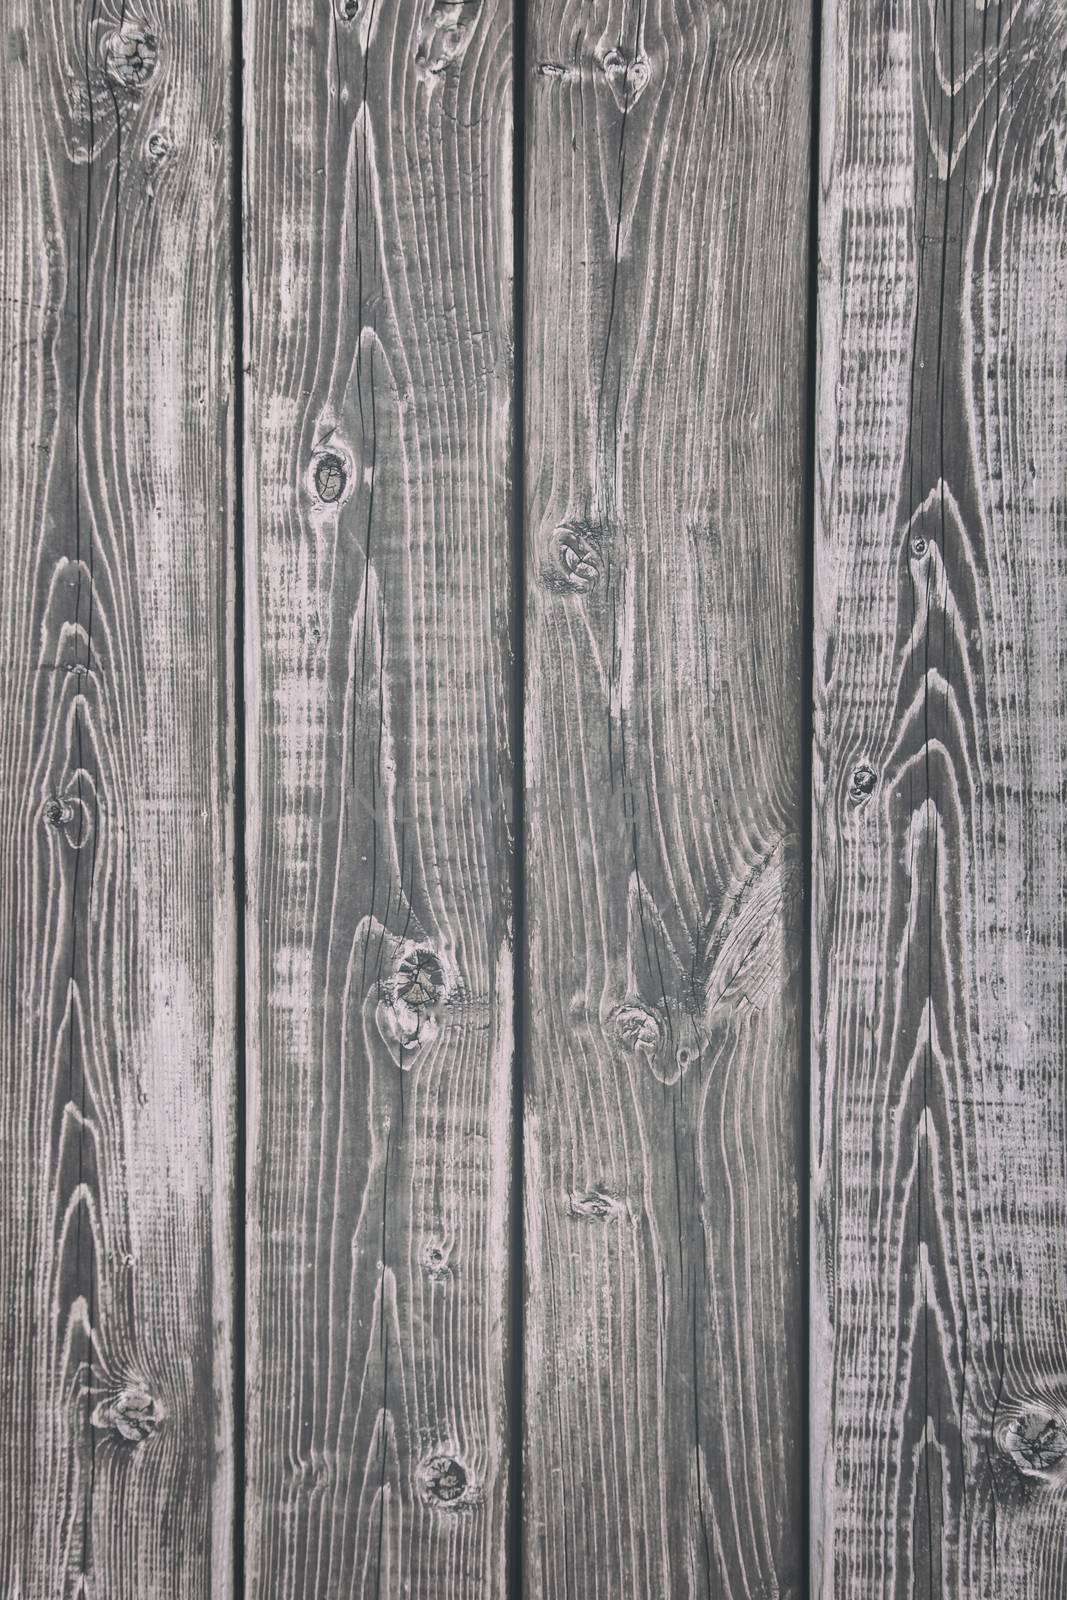 Wooden rustic blanks background by Sandralise